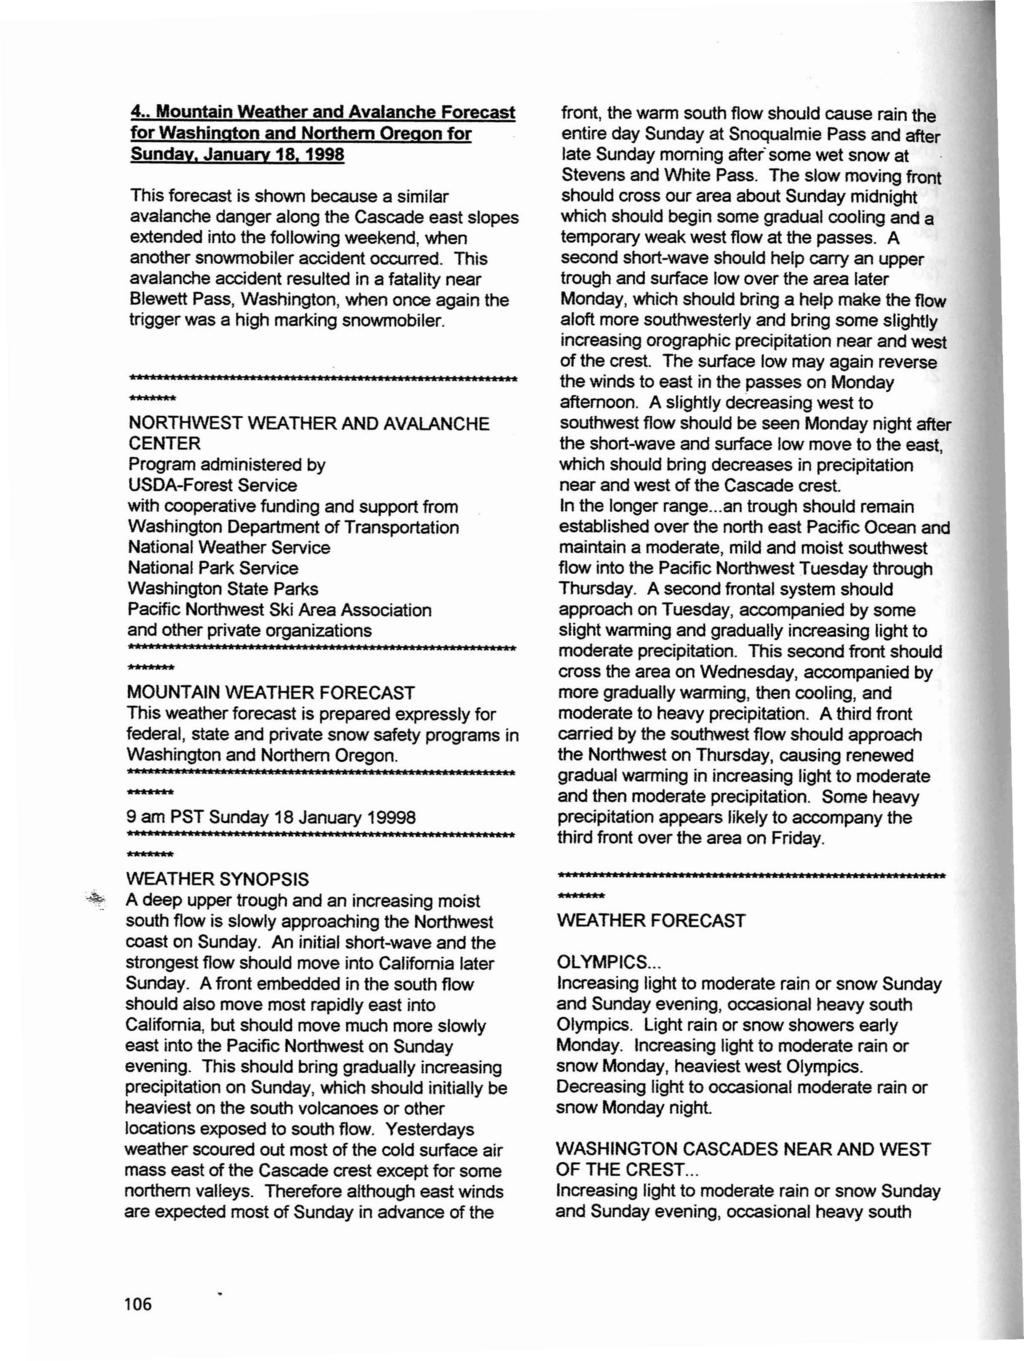 4.. Mountain Weather and Avalanche Forecast for Washington and Northern Oregon for Sundav, January 18, 1998 This forecast is shown because a similar avalanche danger along the Cascade east slopes